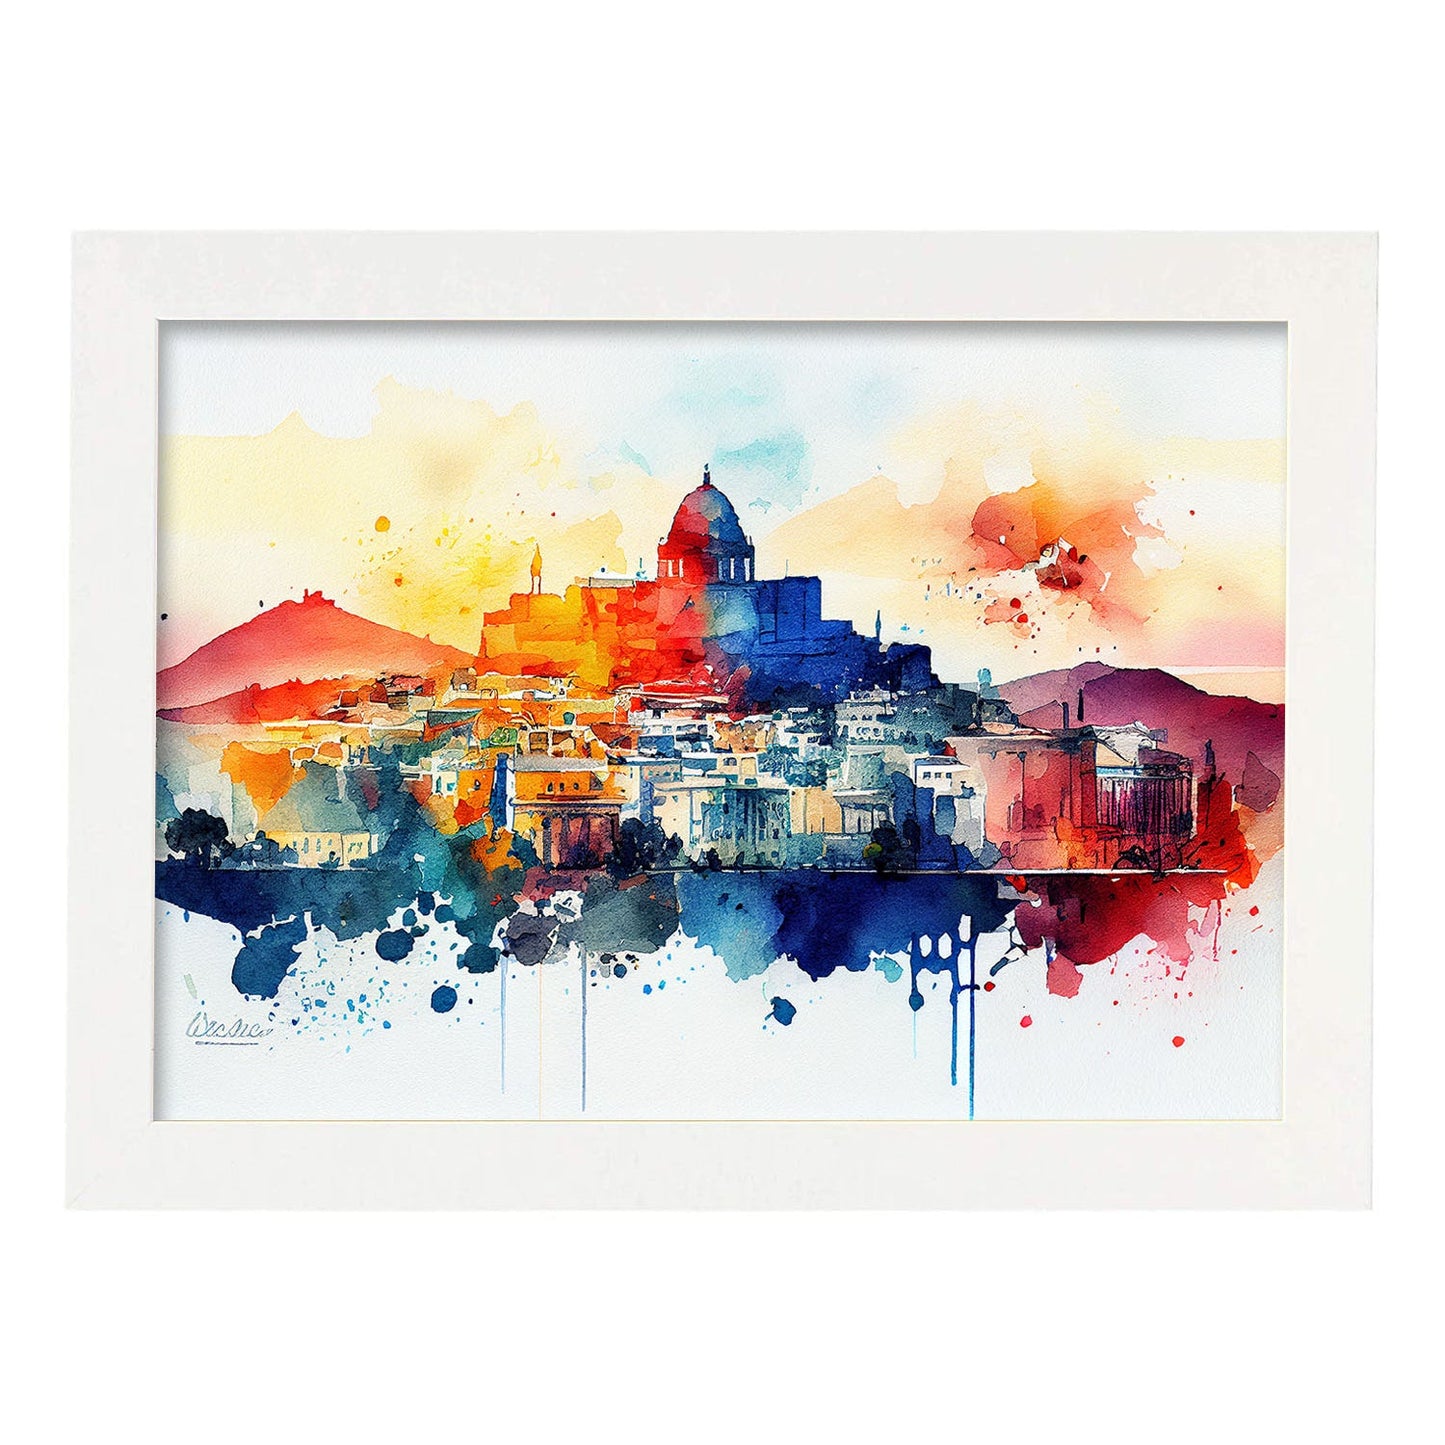 Nacnic watercolor of a skyline of the city of Athens. Aesthetic Wall Art Prints for Bedroom or Living Room Design.-Artwork-Nacnic-A4-Marco Blanco-Nacnic Estudio SL